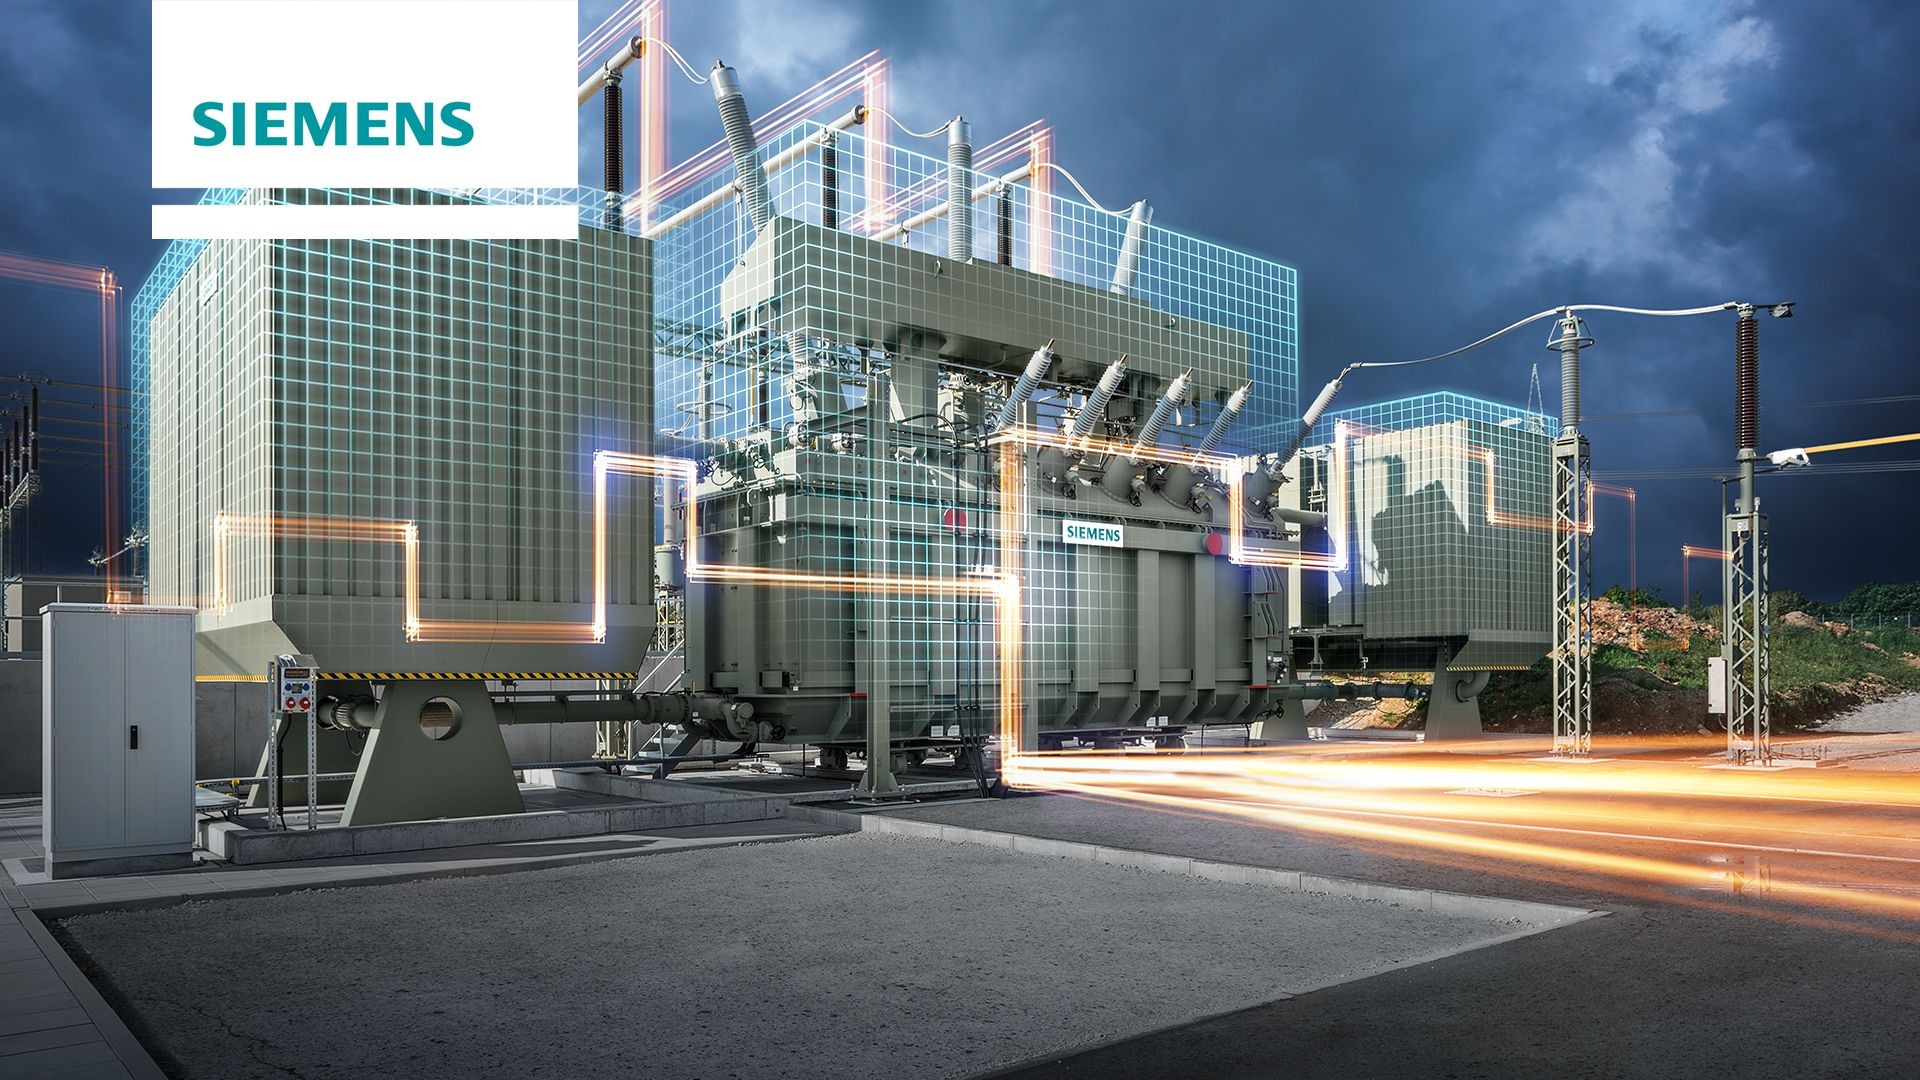 Siemens: A technology company focused on industry, digital transformation, transport, and generation of electrical power. 1920x1080 Full HD Background.